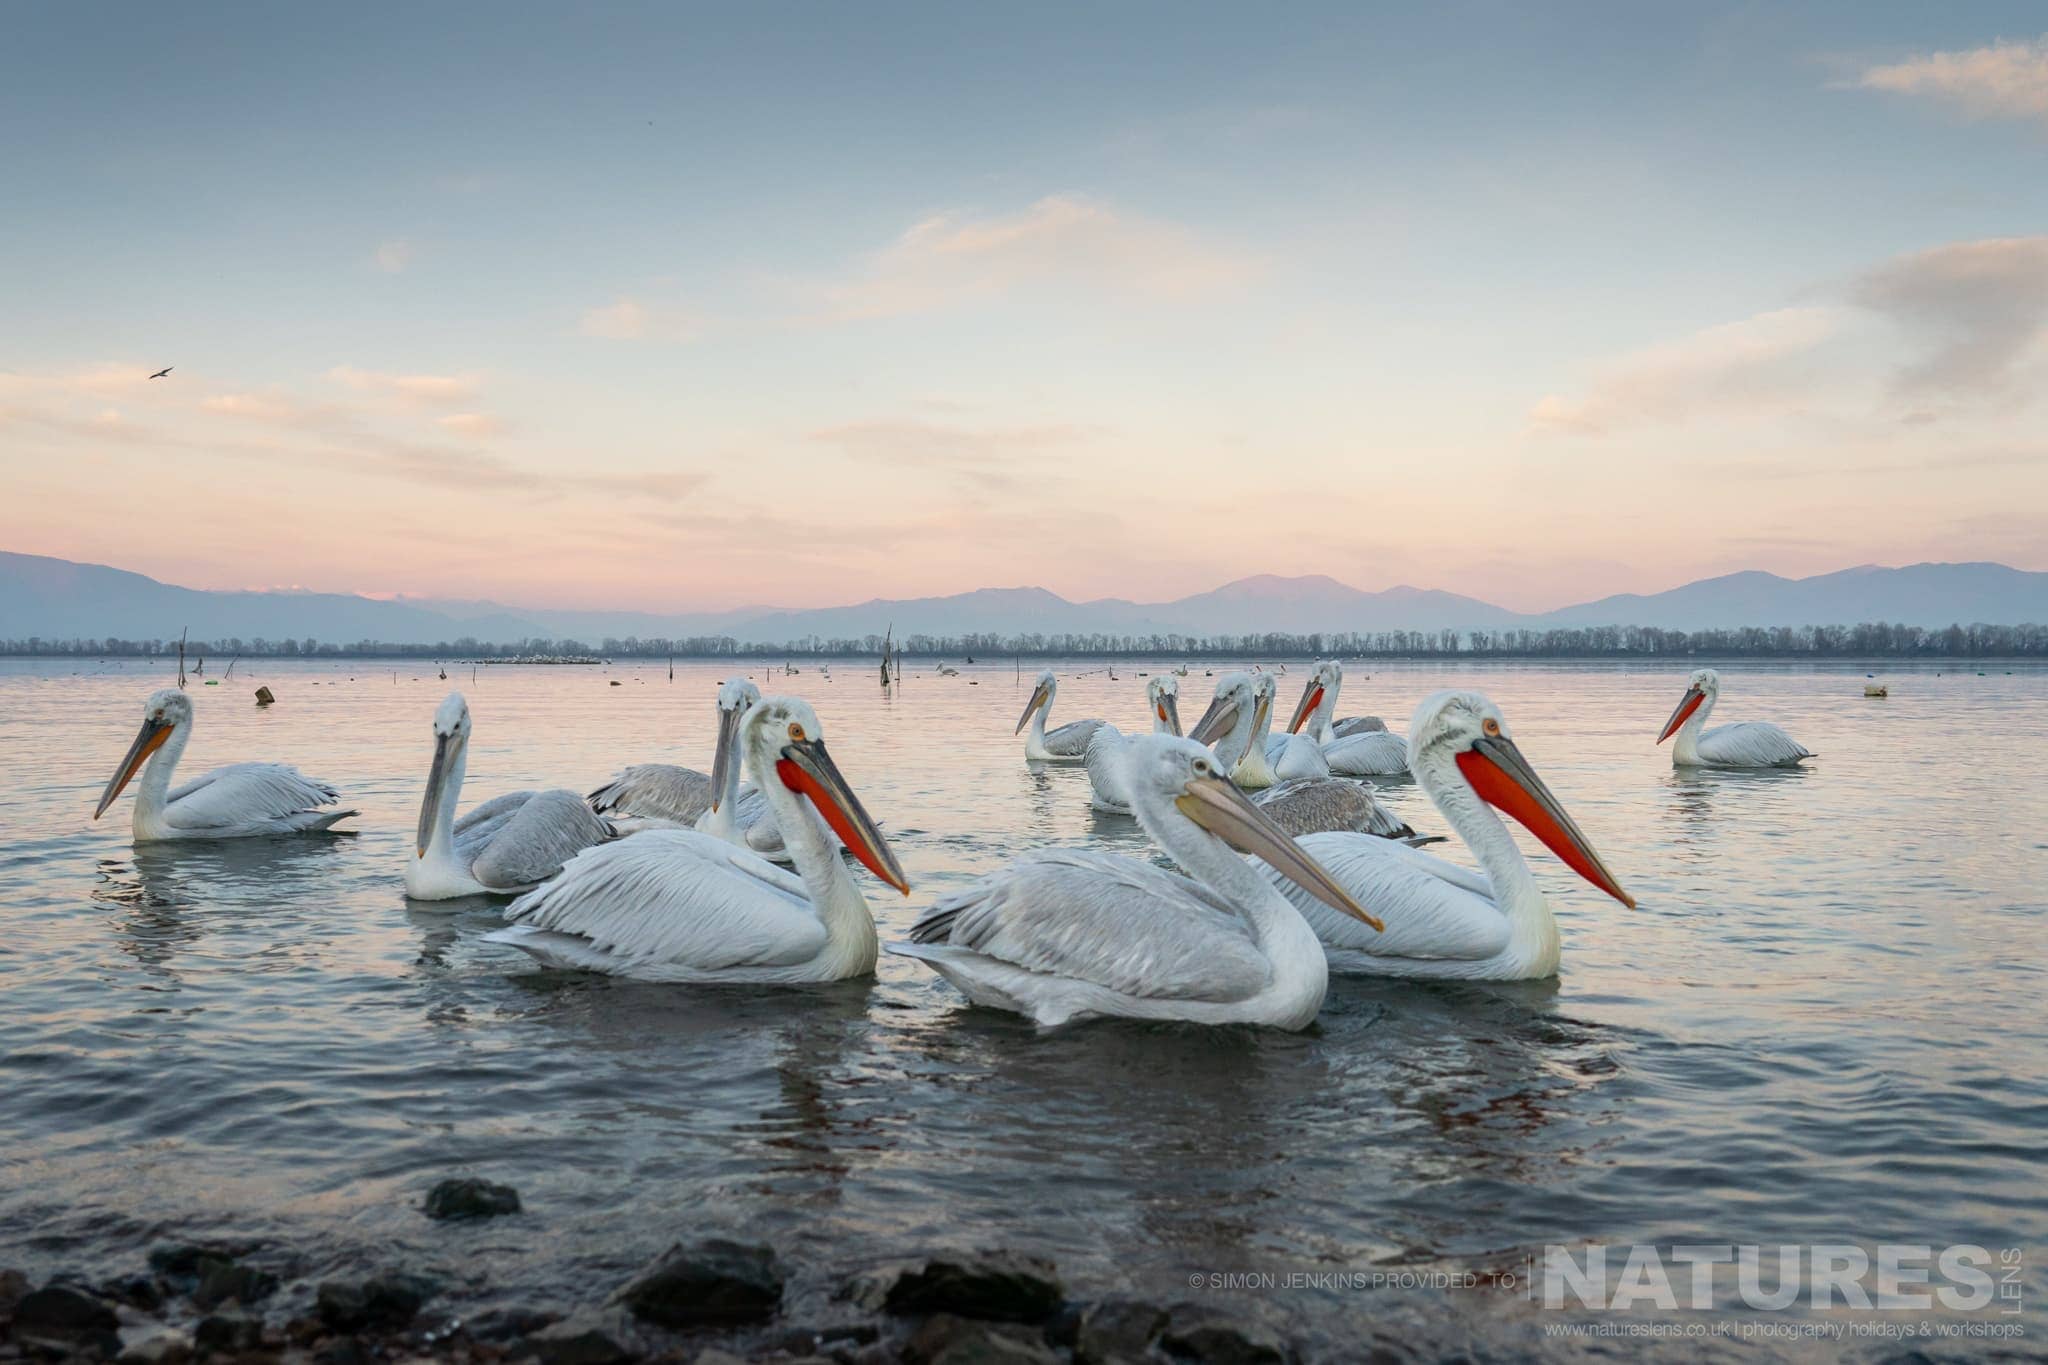 A Group Of Lake Kerkini's Pelicans Drift On The Waters Of The Lake With The Mountains Behind